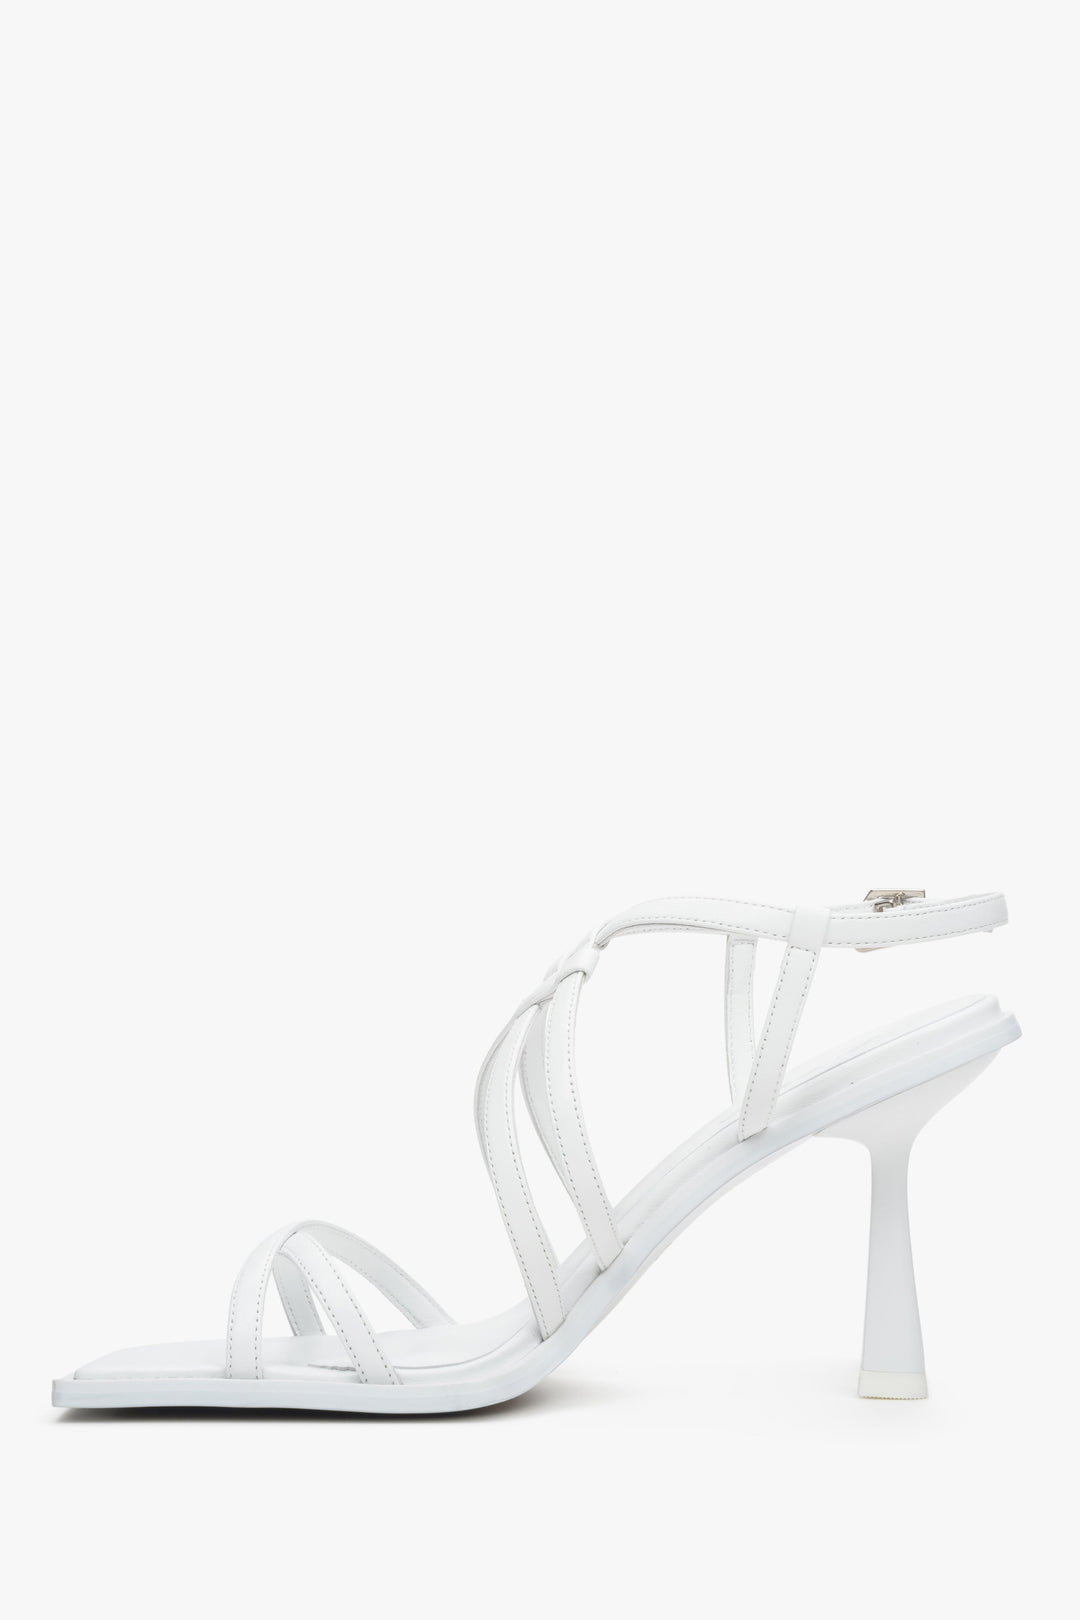 Women's strappy, heeled sandals in white colour - shoe profile.